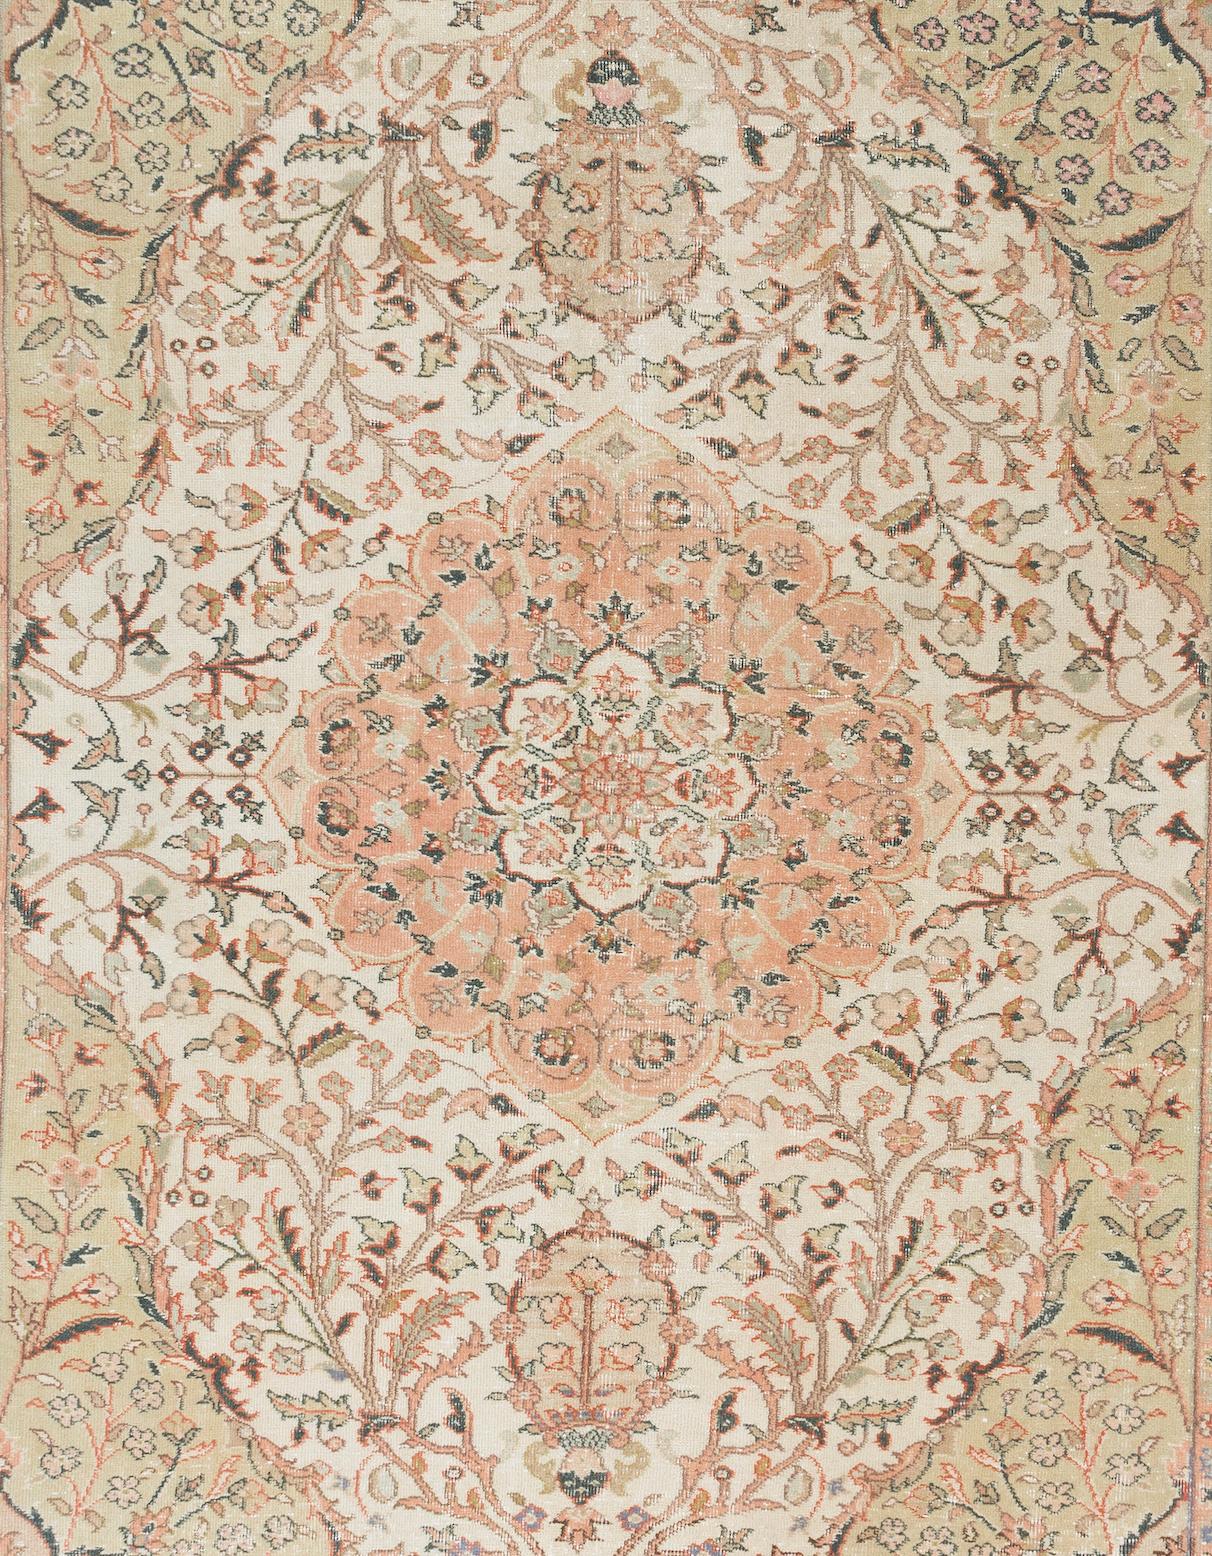 A finely hand knotted vintage Anatolian wool rug from Ladik, Konya in beautiful pastel tones of salmon pink, sand, sage green and beige. 

The centerpiece of the rug is a large, intricately-drawn medallion surrounded with floral and leafy vine